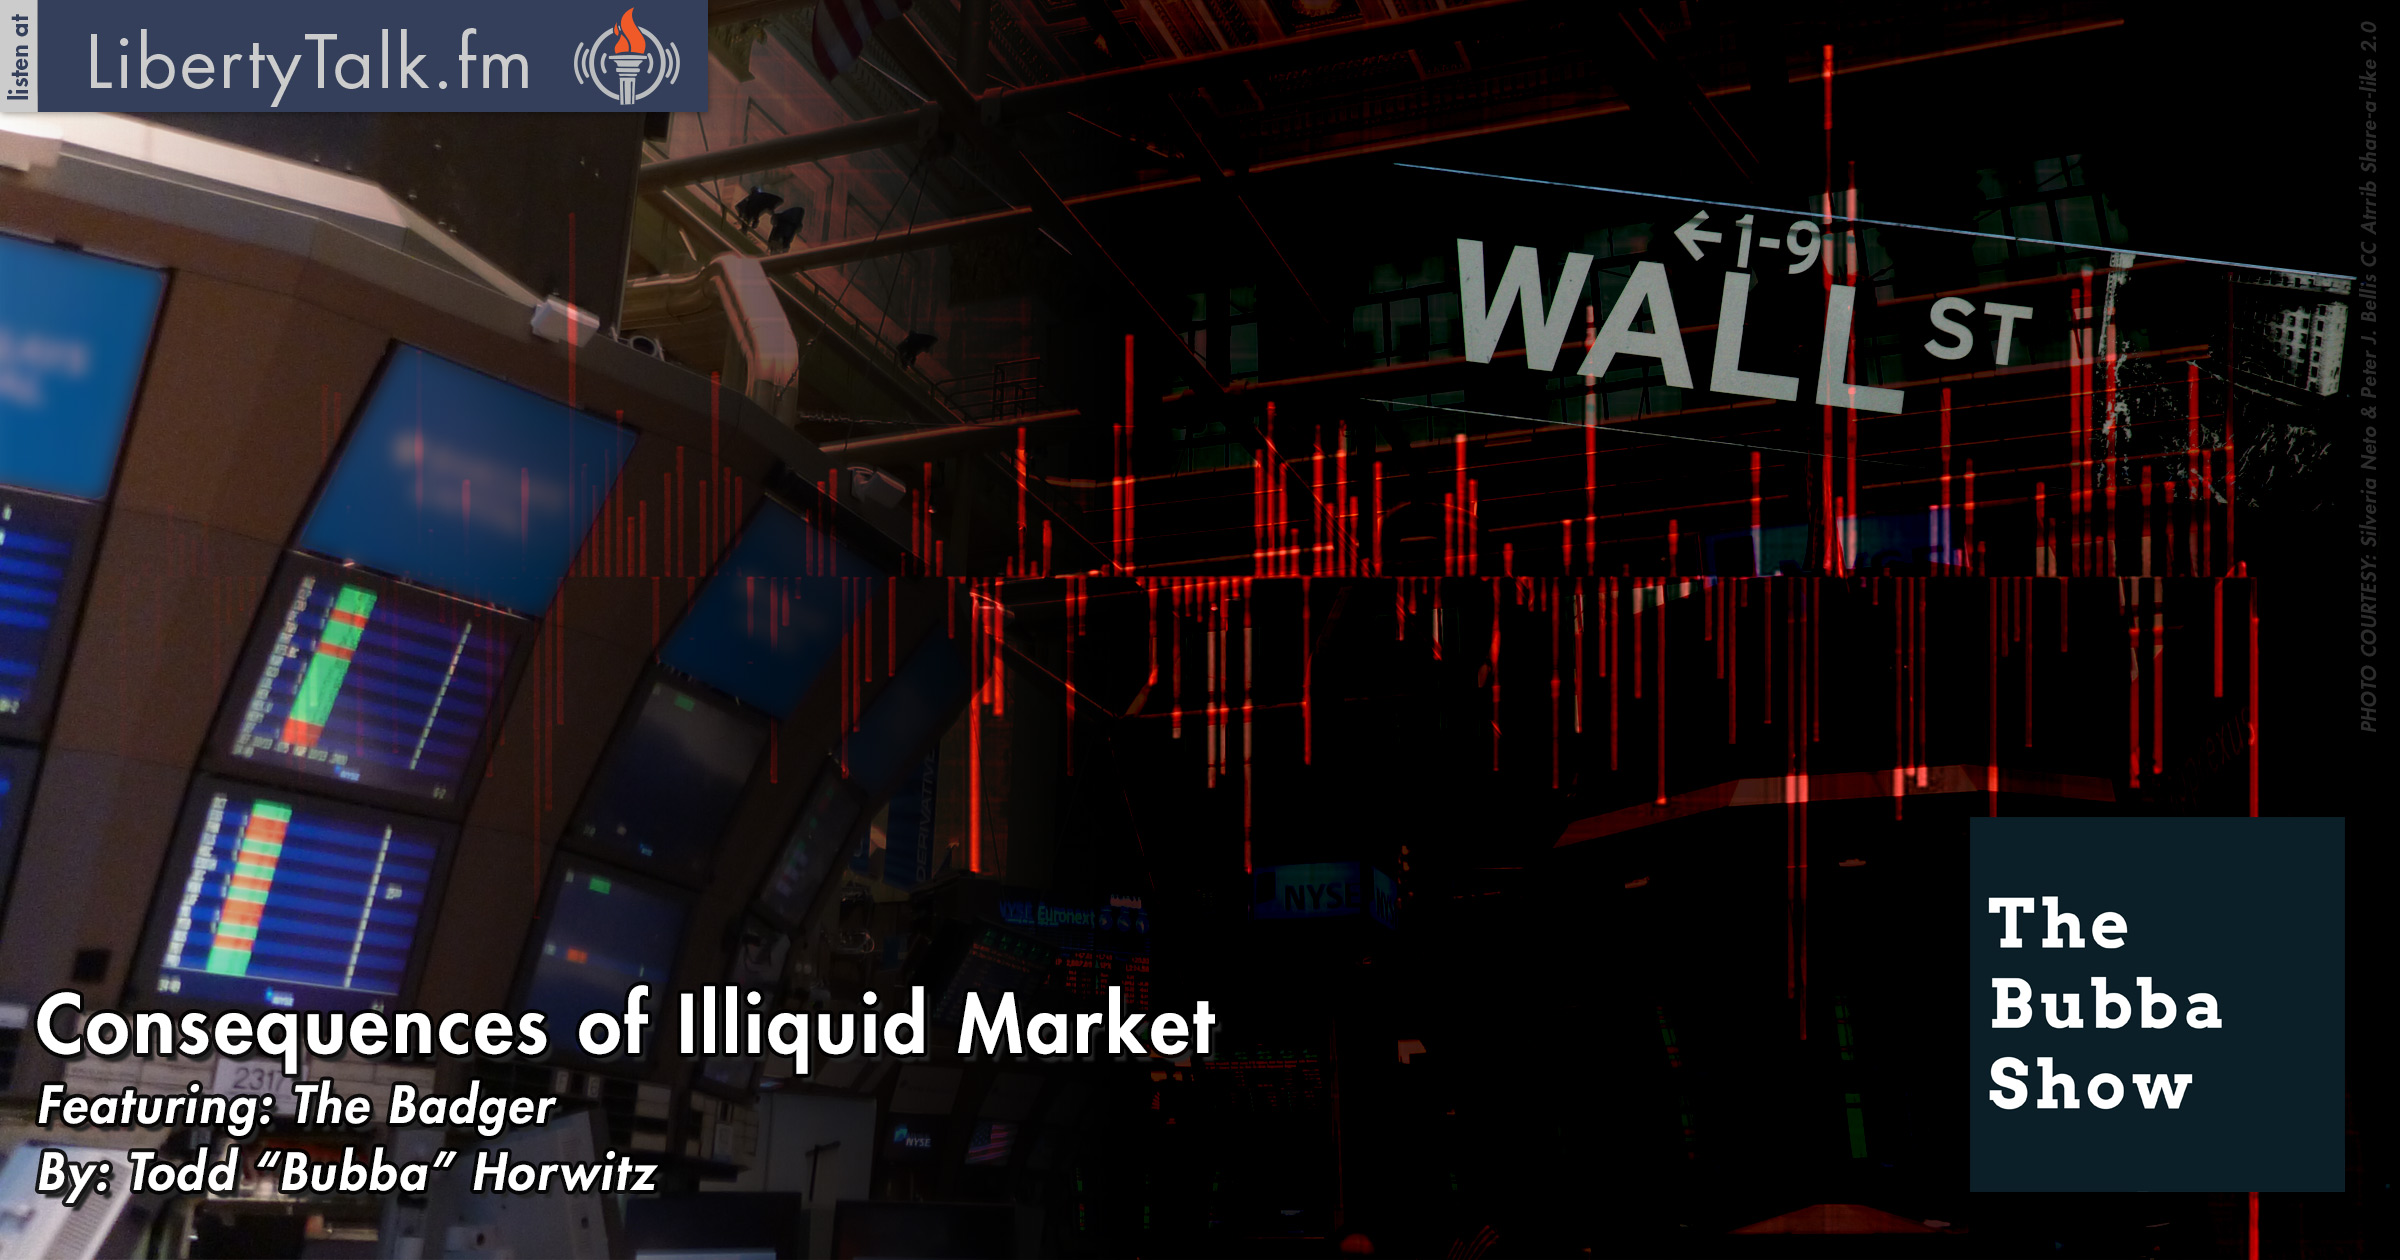 COnsequences of an Illiquid Market